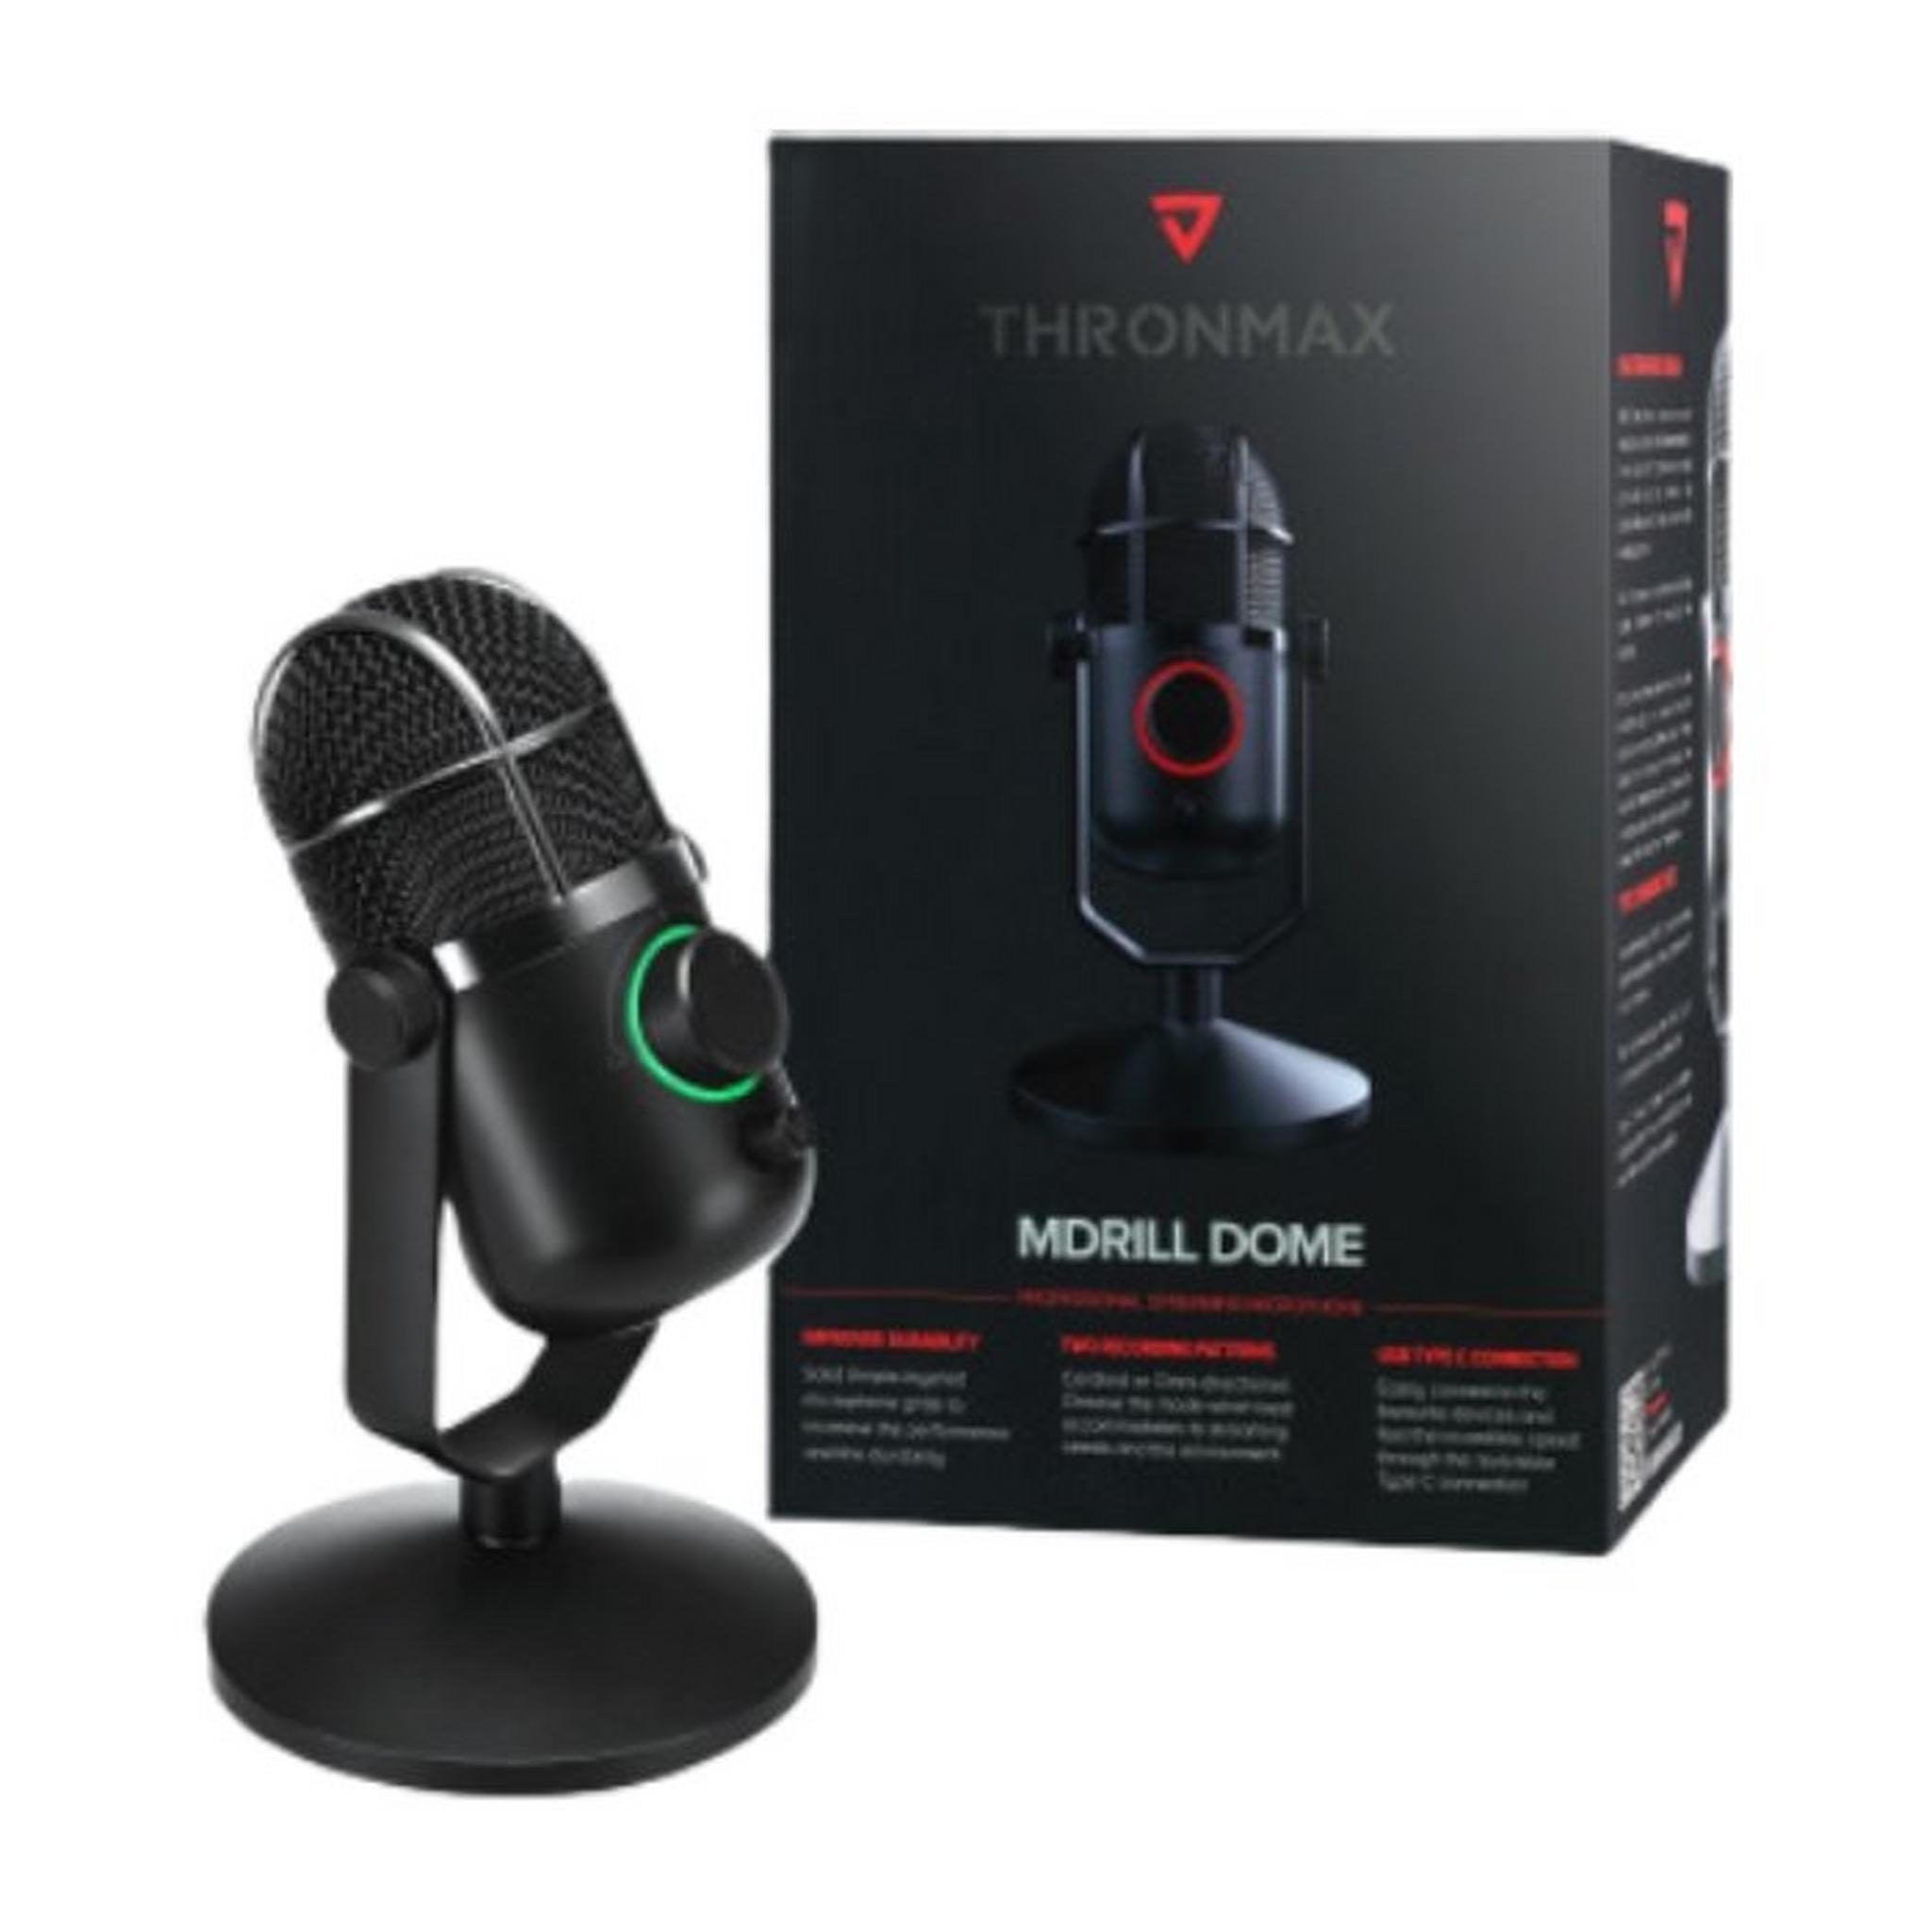 Thronmax MDrill Dome Plus USB Streaming Microphone -  Jet Black